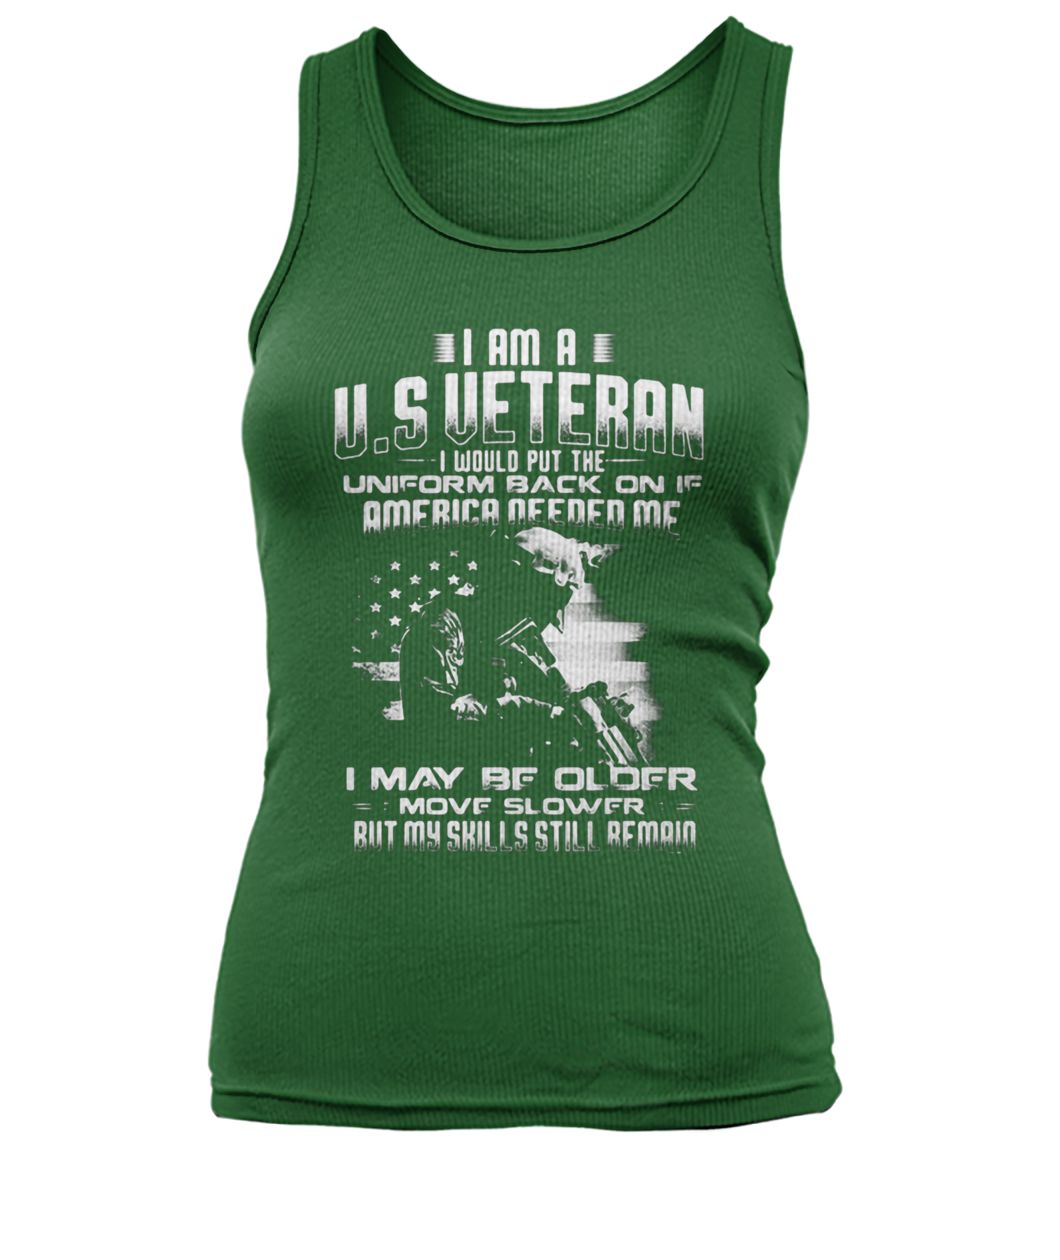 I am a US veteran I would put the uniform back on if america needed me women's tank top